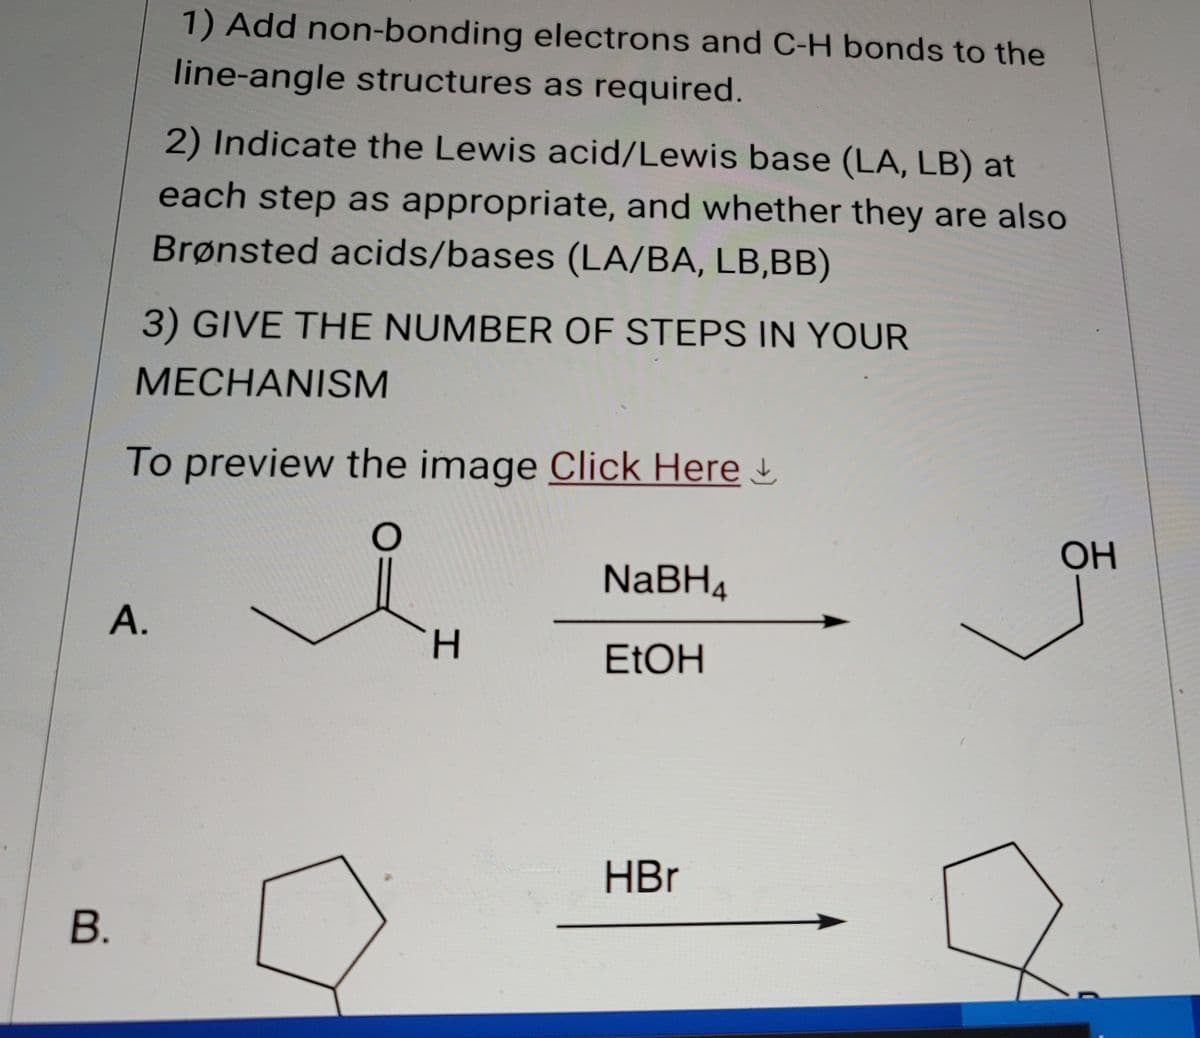 B.
1) Add non-bonding electrons and C-H bonds to the
line-angle structures as required.
2) Indicate the Lewis acid/Lewis base (LA, LB) at
each step as appropriate, and whether they are also
Brønsted acids/bases (LA/BA, LB,BB)
3) GIVE THE NUMBER OF STEPS IN YOUR
MECHANISM
To preview the image Click Here
NaBH4
A.
H
EtOH
HBr
OH